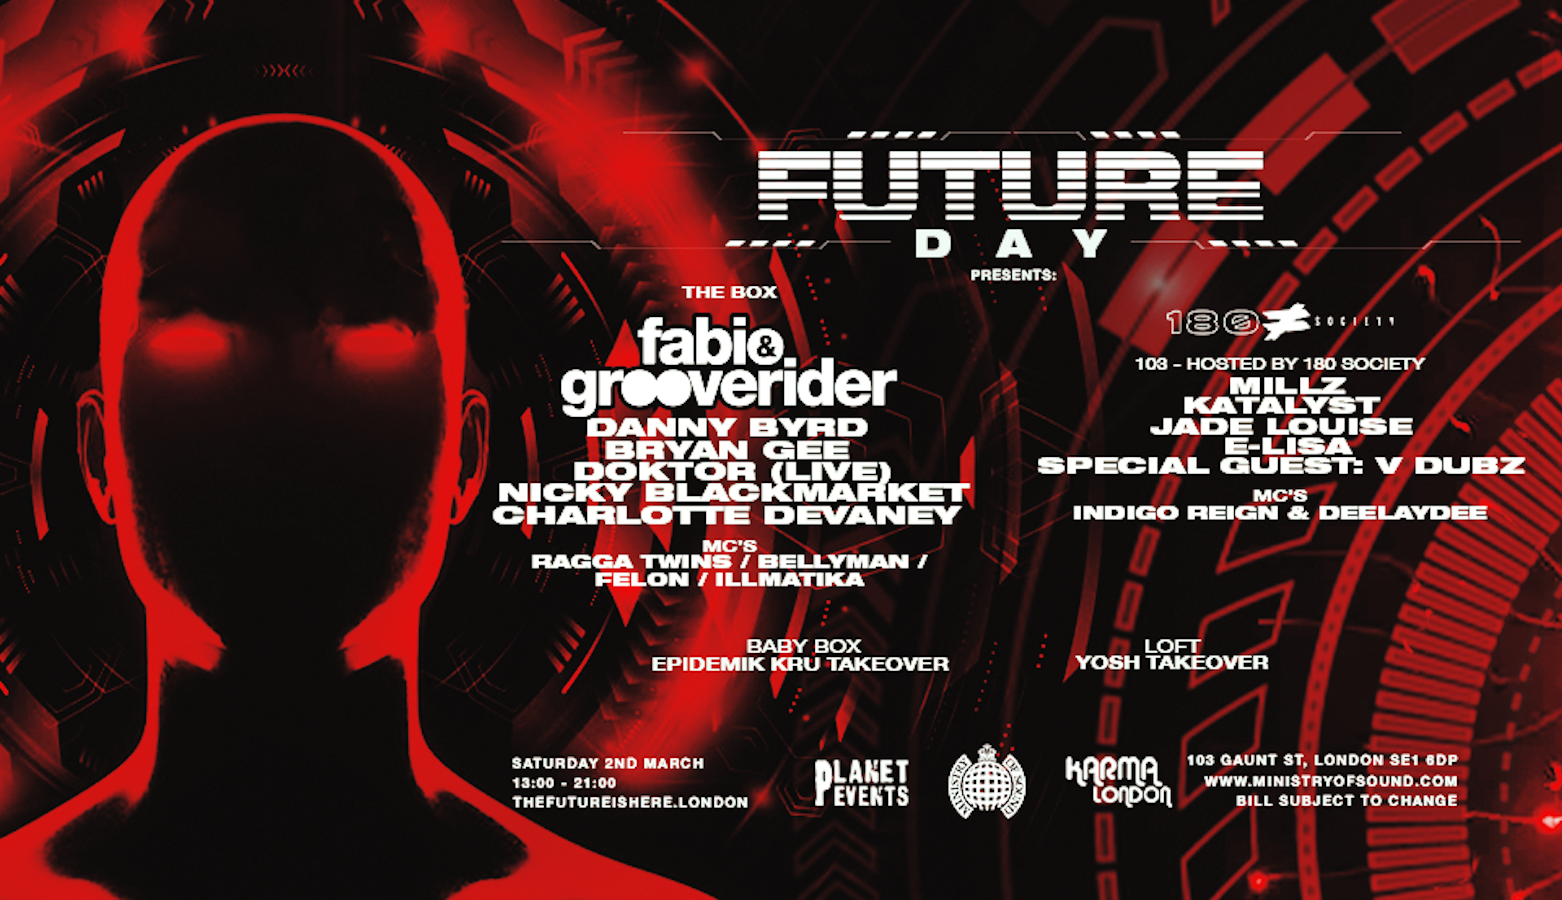 Ministry of Sound present: FUTURE DAY PARTY  ft FABIO & GROOVERIDER, DOKTOR + MORE  🔊